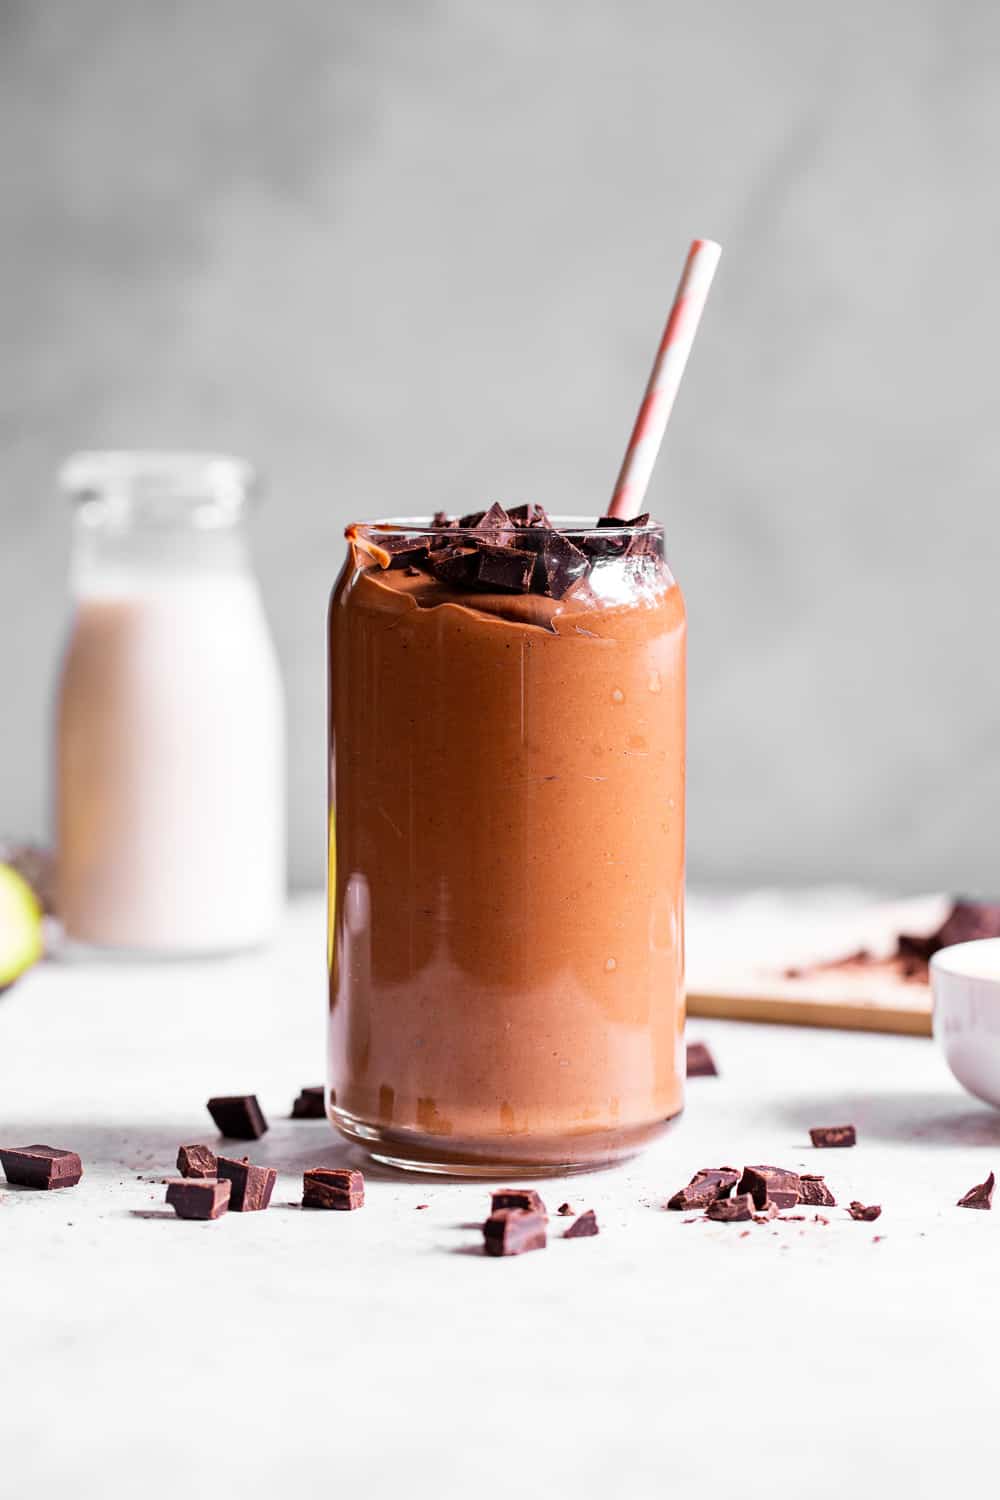 This creamy brownie batter chocolate smoothie is packed with good for you ingredients but tastes like dessert!  Have it for breakfast, a snack, or healthy dessert.  It's paleo friendly, dairy free, vegan and free of refined sugar.  Add your favorite chocolate protein powder for an extra chocolate kick! #paleo #vegan #cleaneating